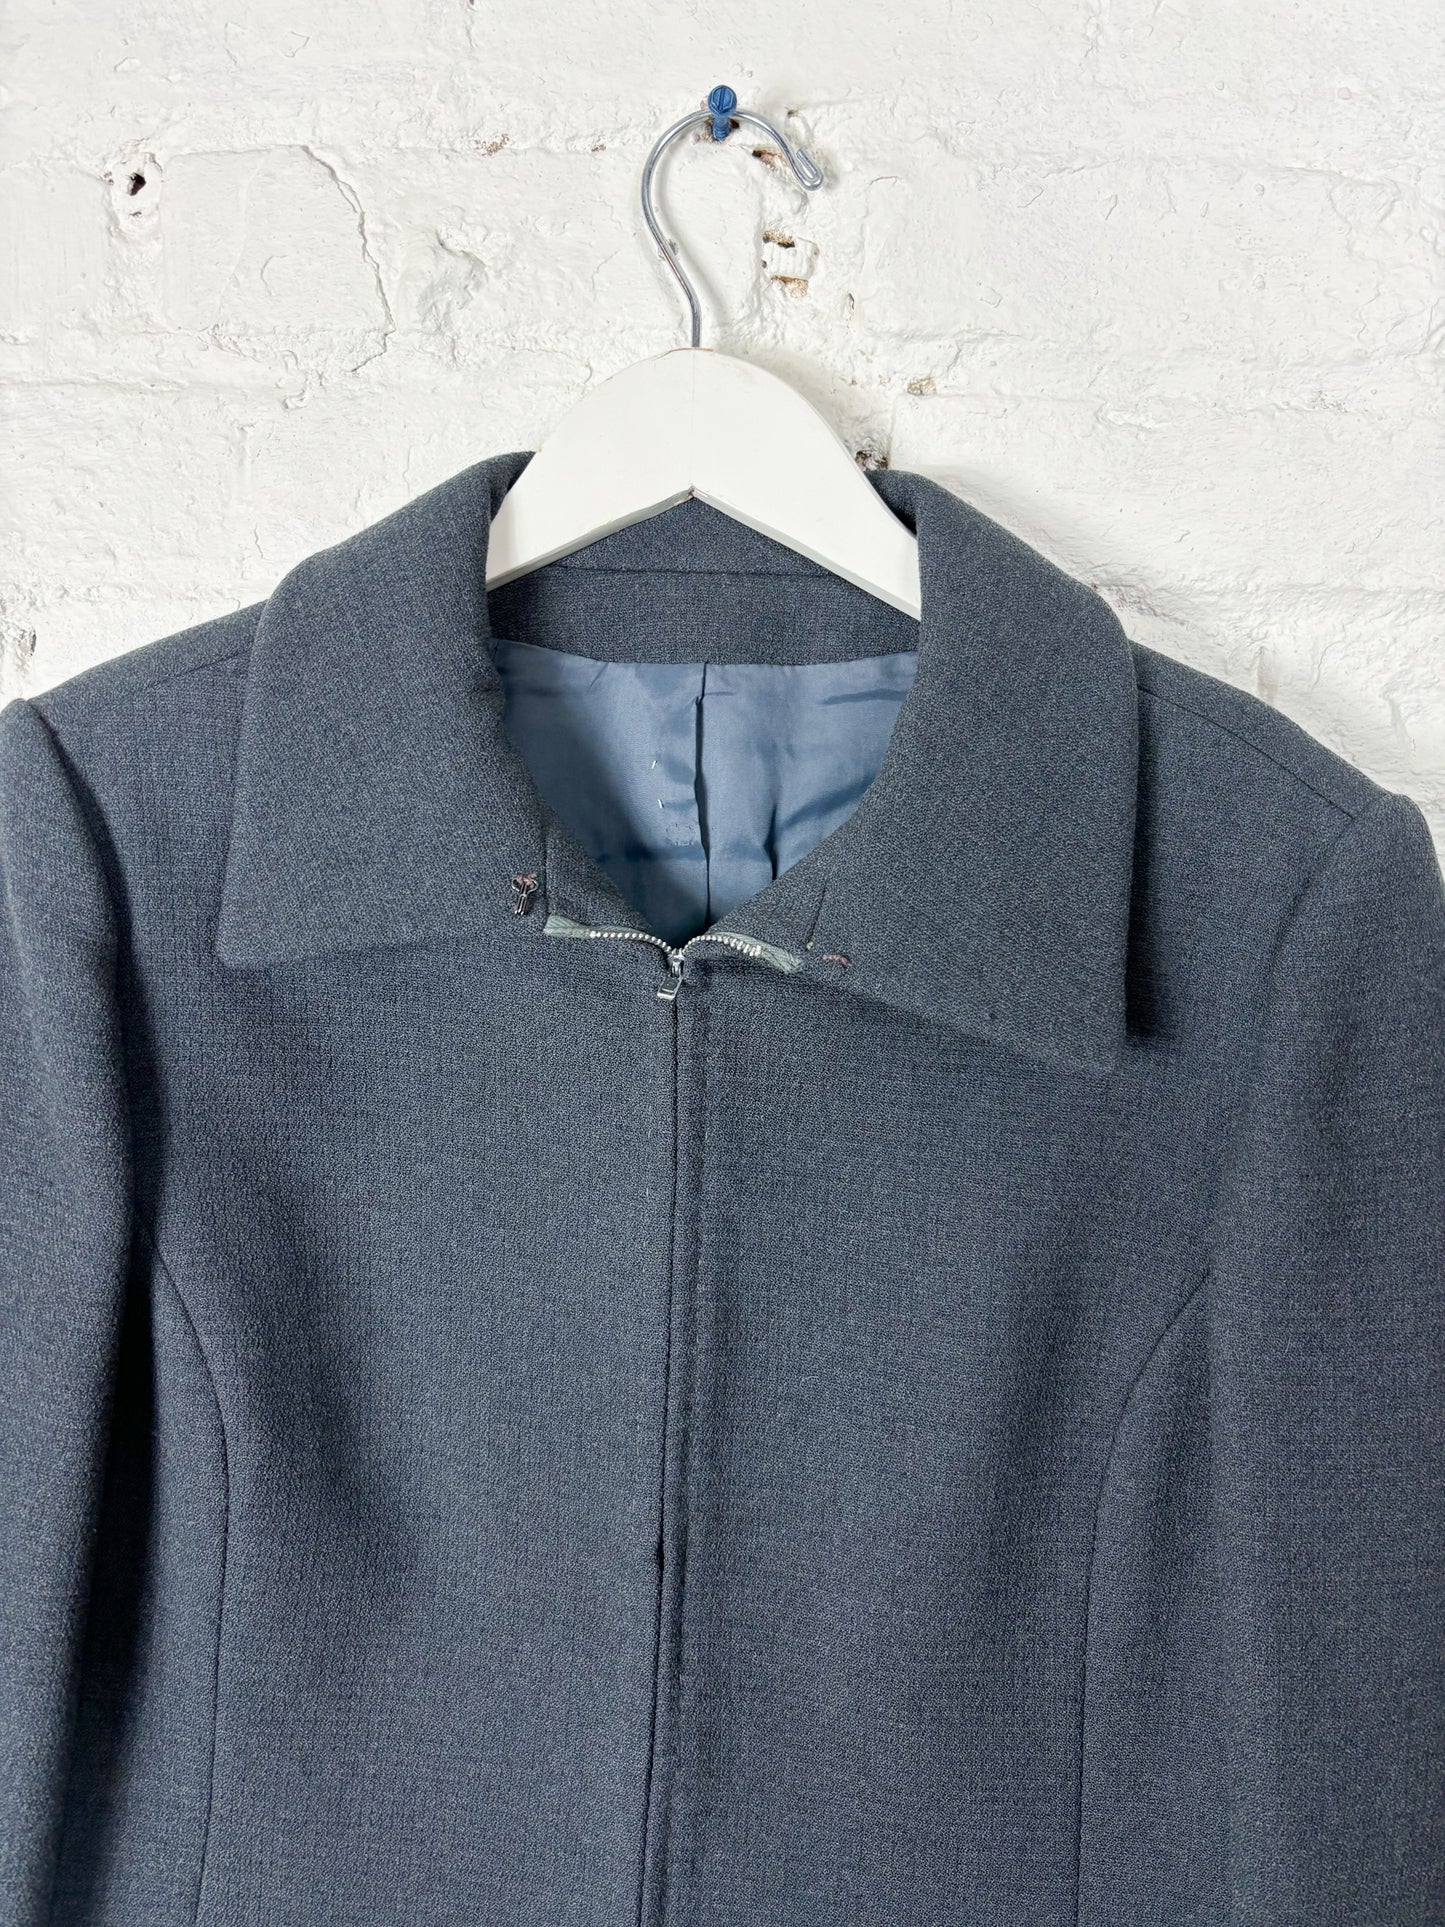 60's Mrs. Maisel Charcoal Grey Cropped Jacket | S